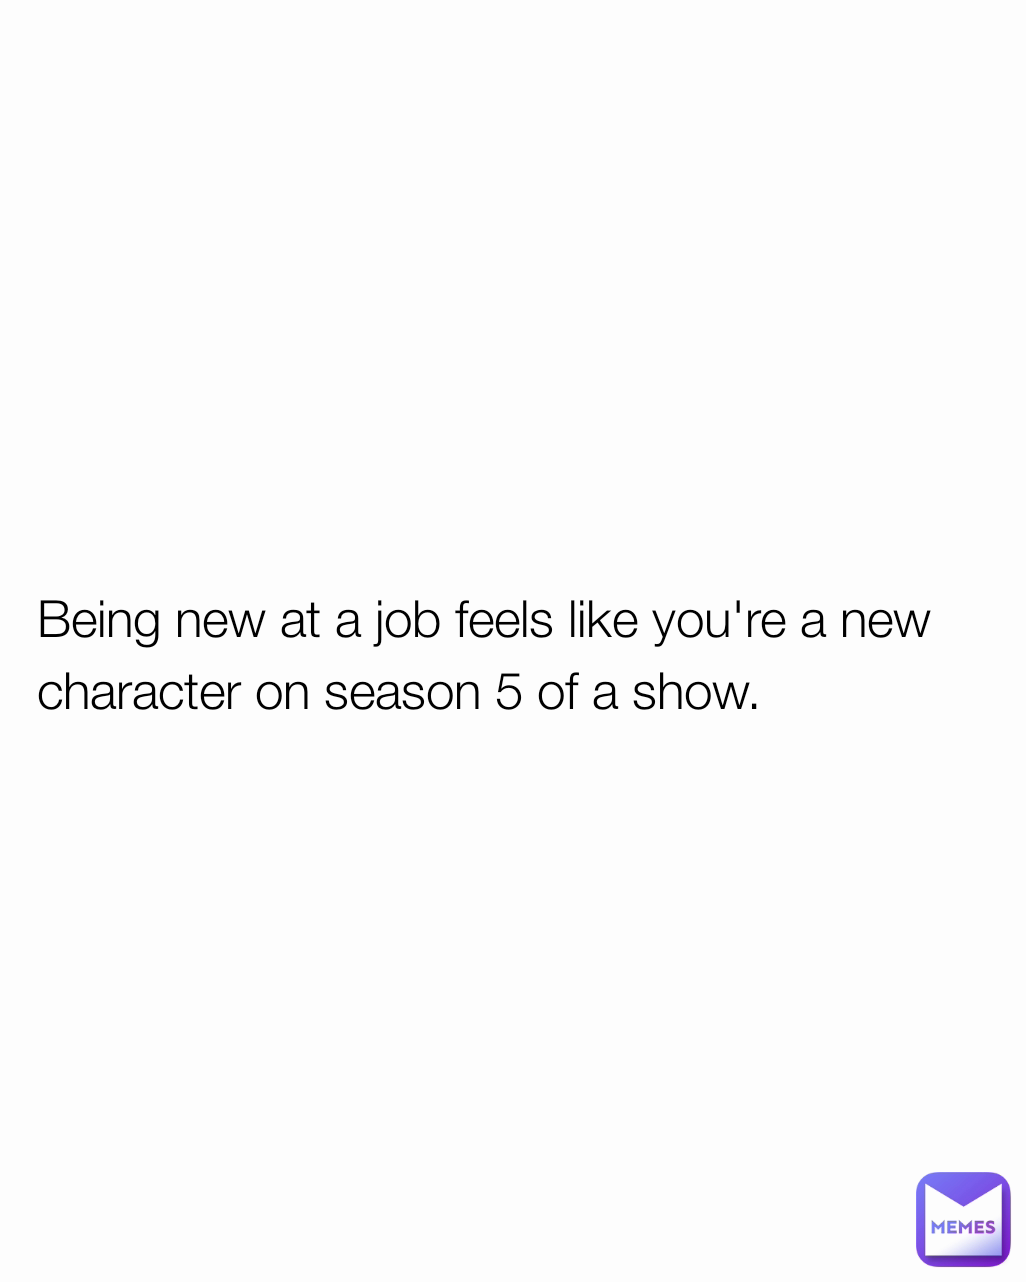 Being new at a job feels like you're a new
character on season 5 of a show.